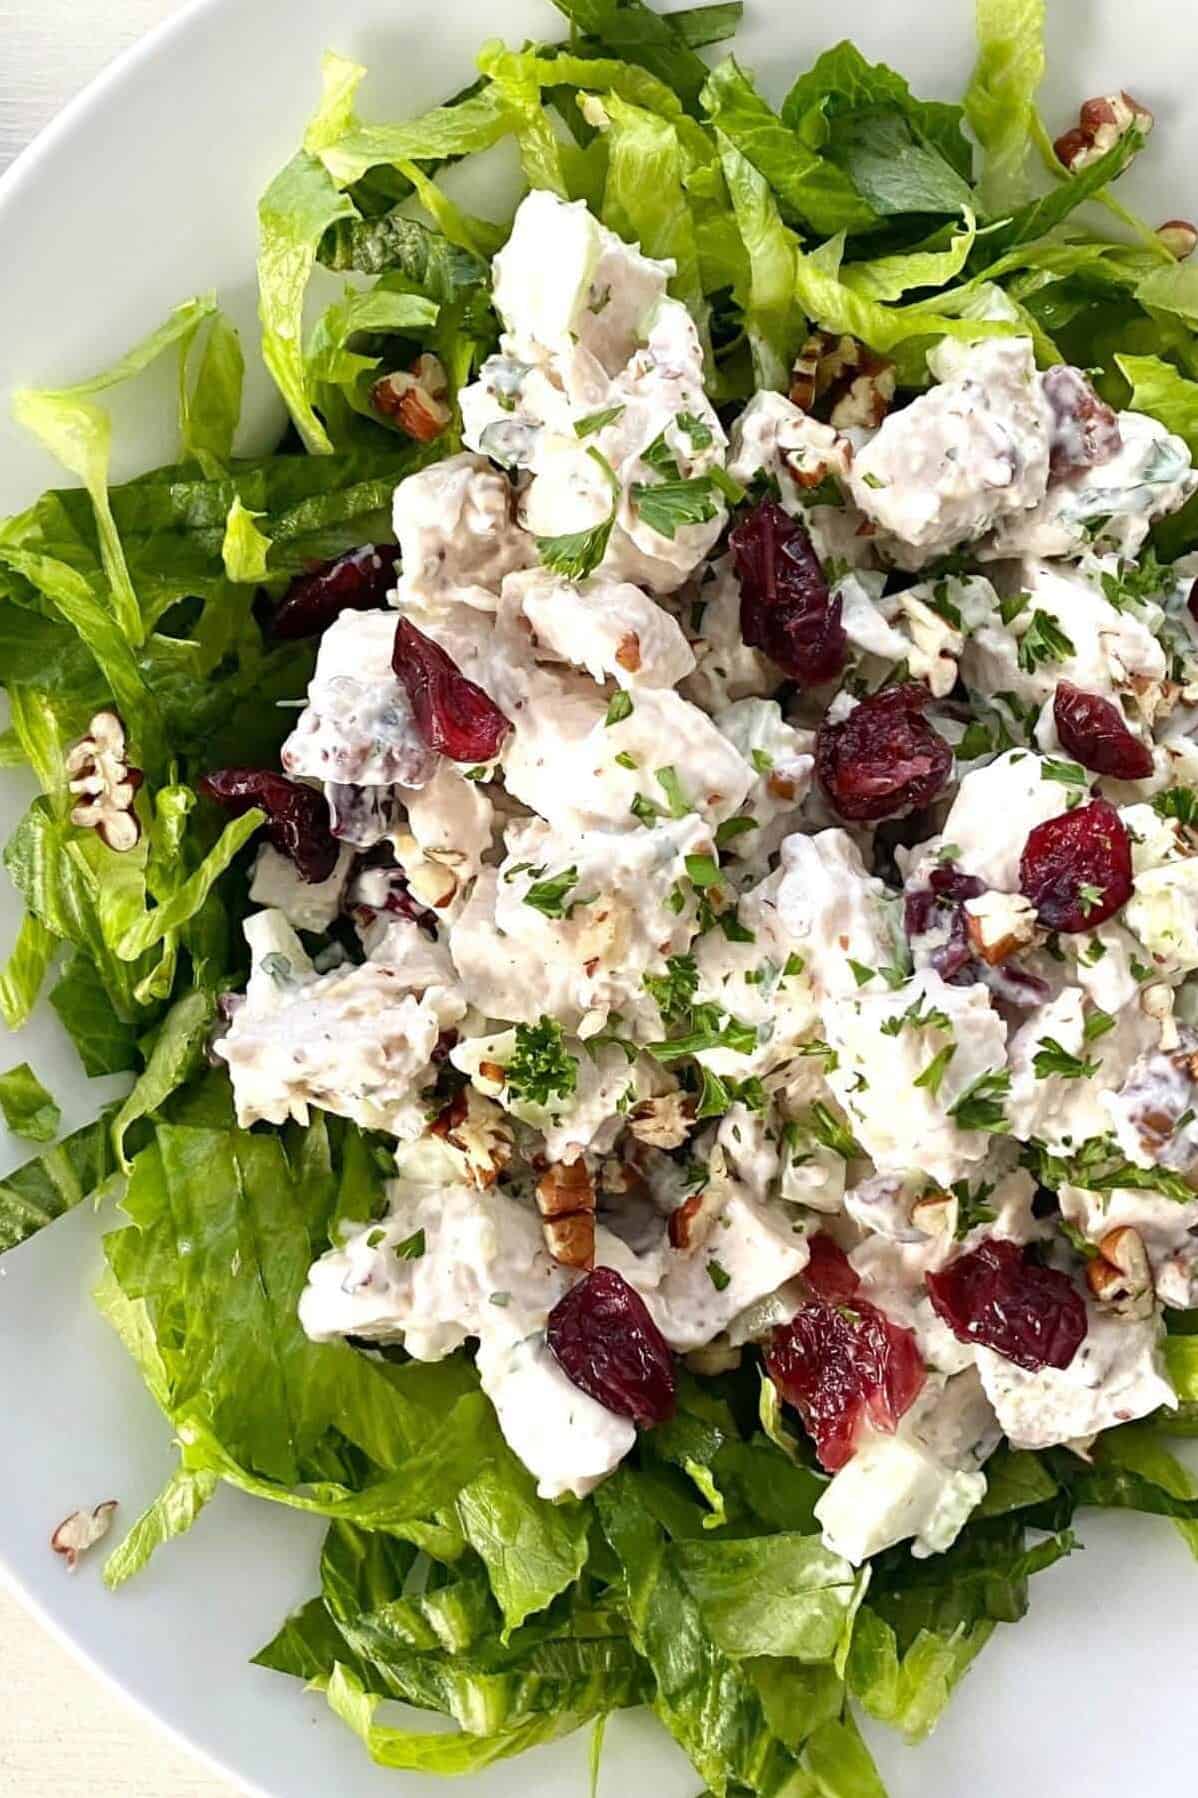  A salad that is both beautiful and delicious